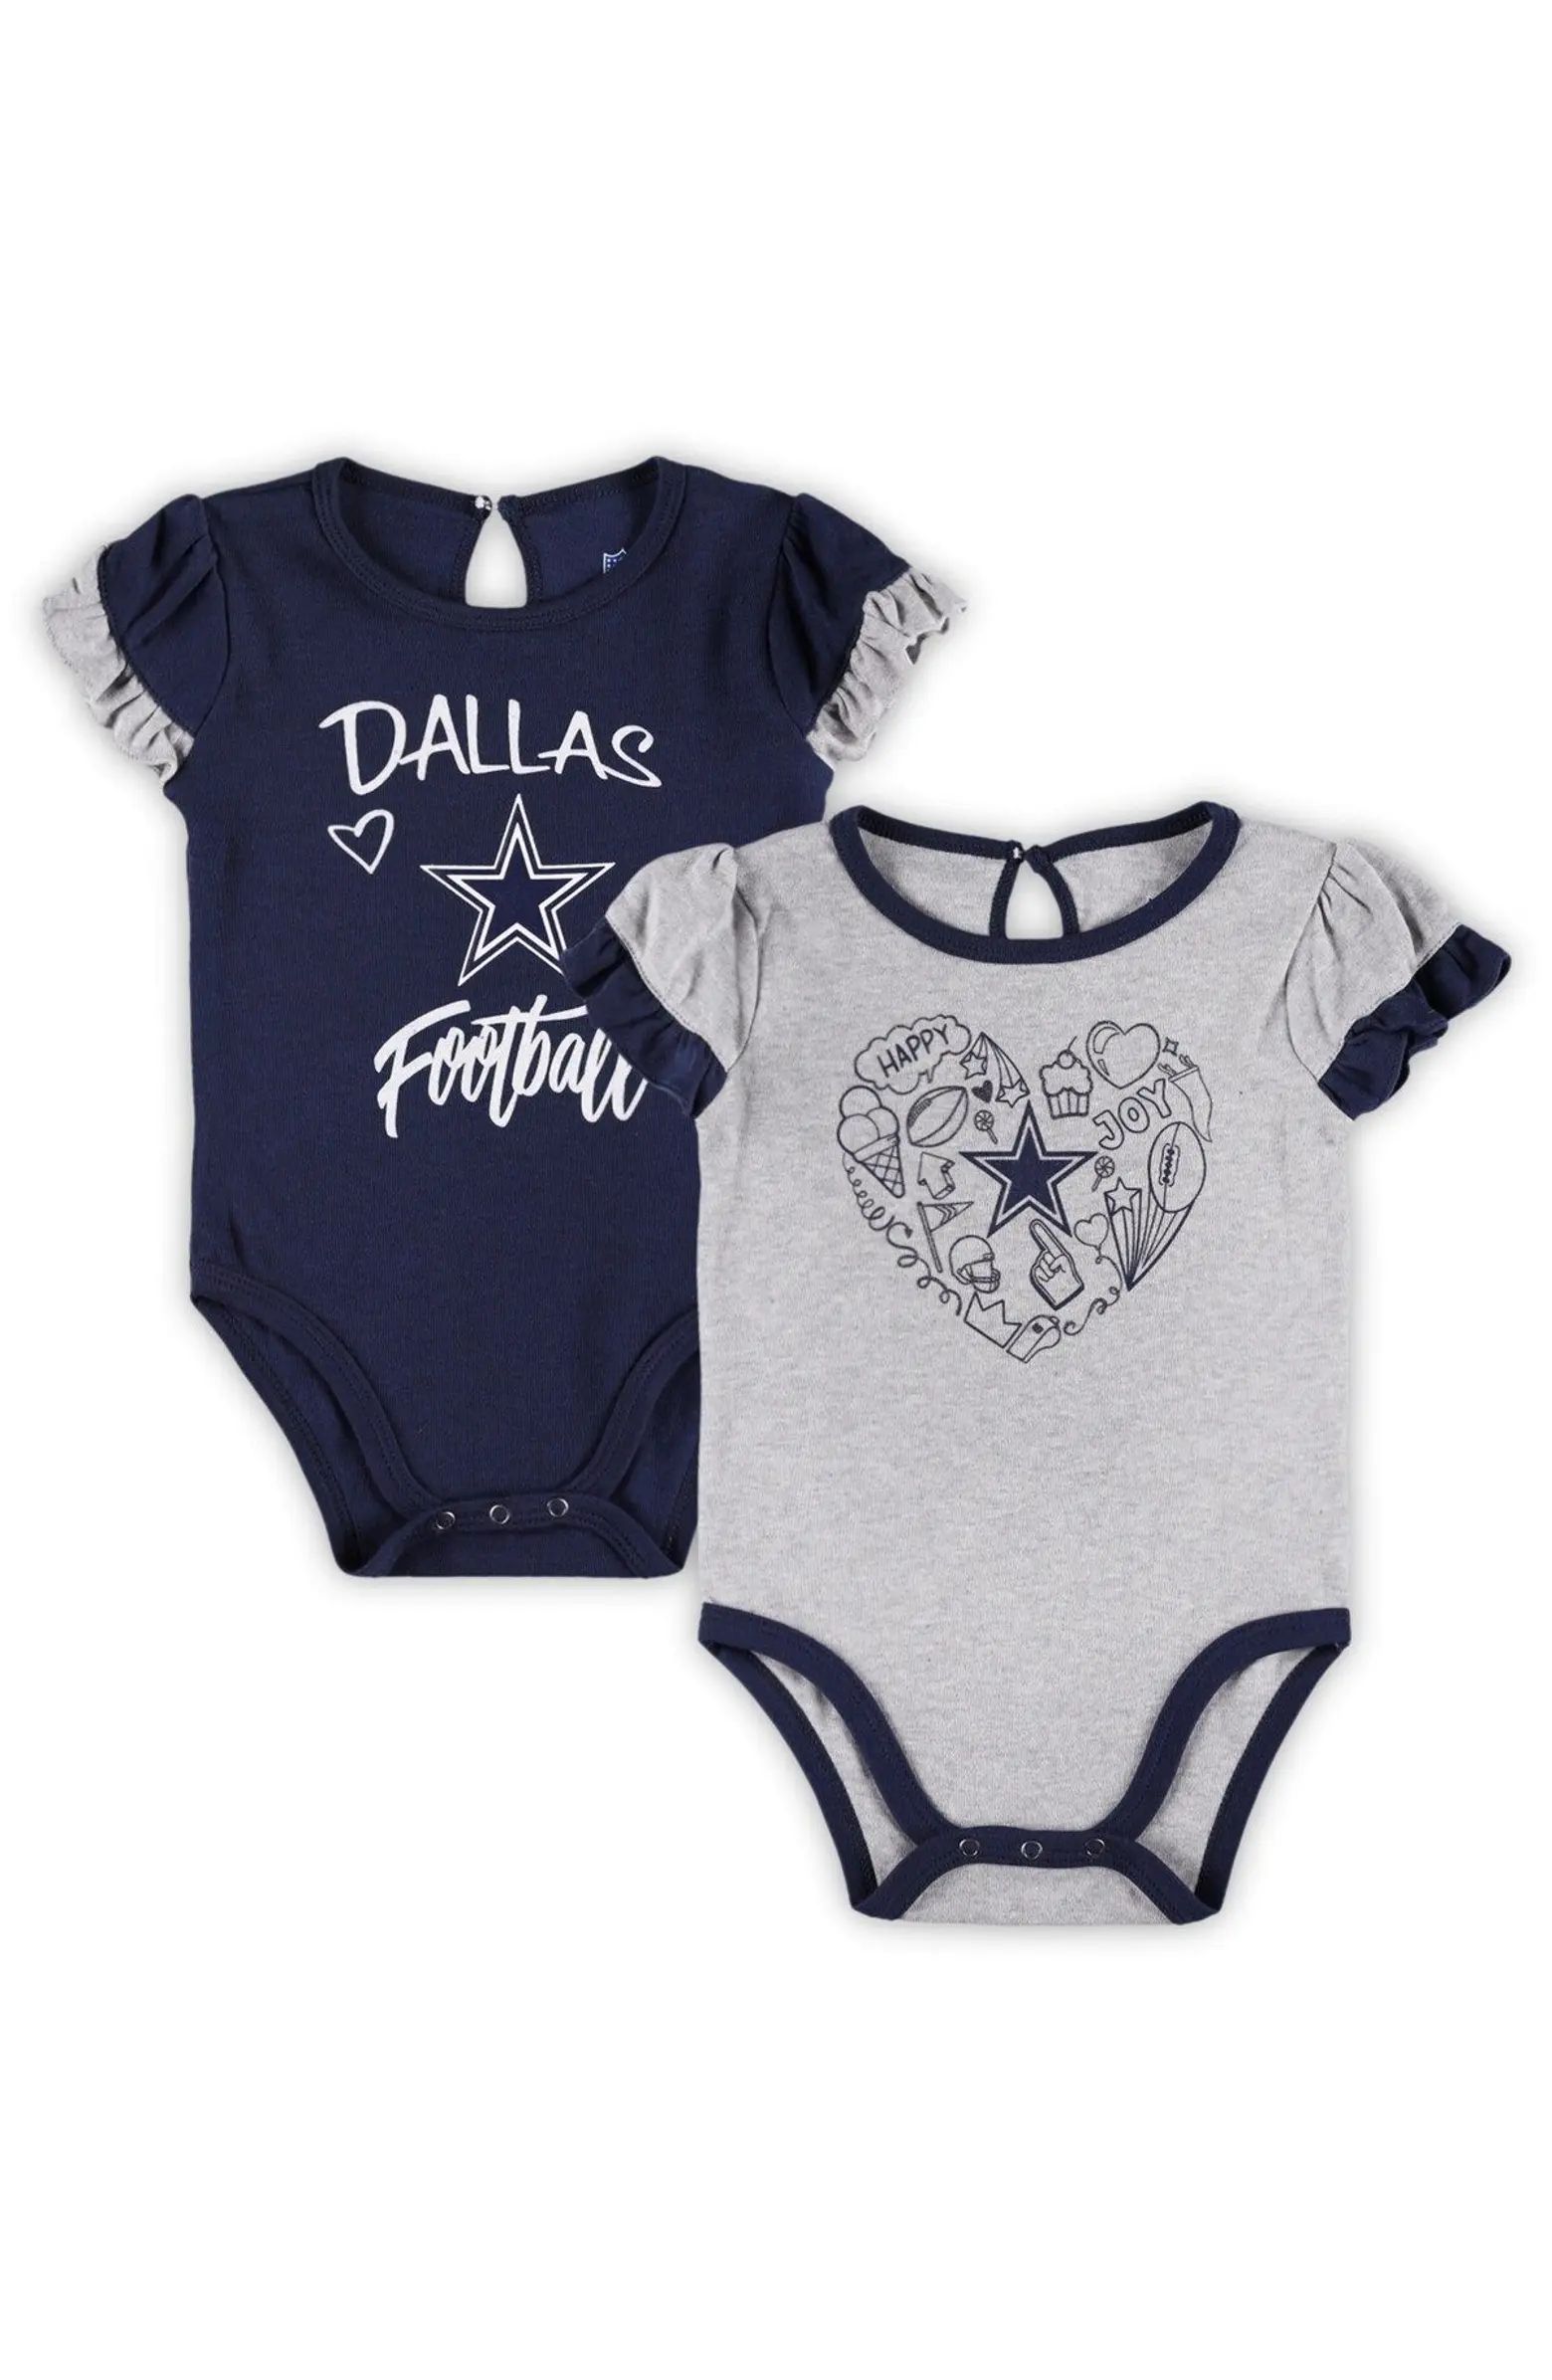 Newborn & Infant Navy/Gray Dallas Cowboys Two-Pack Too Much Love Bodysuit Set | Nordstrom